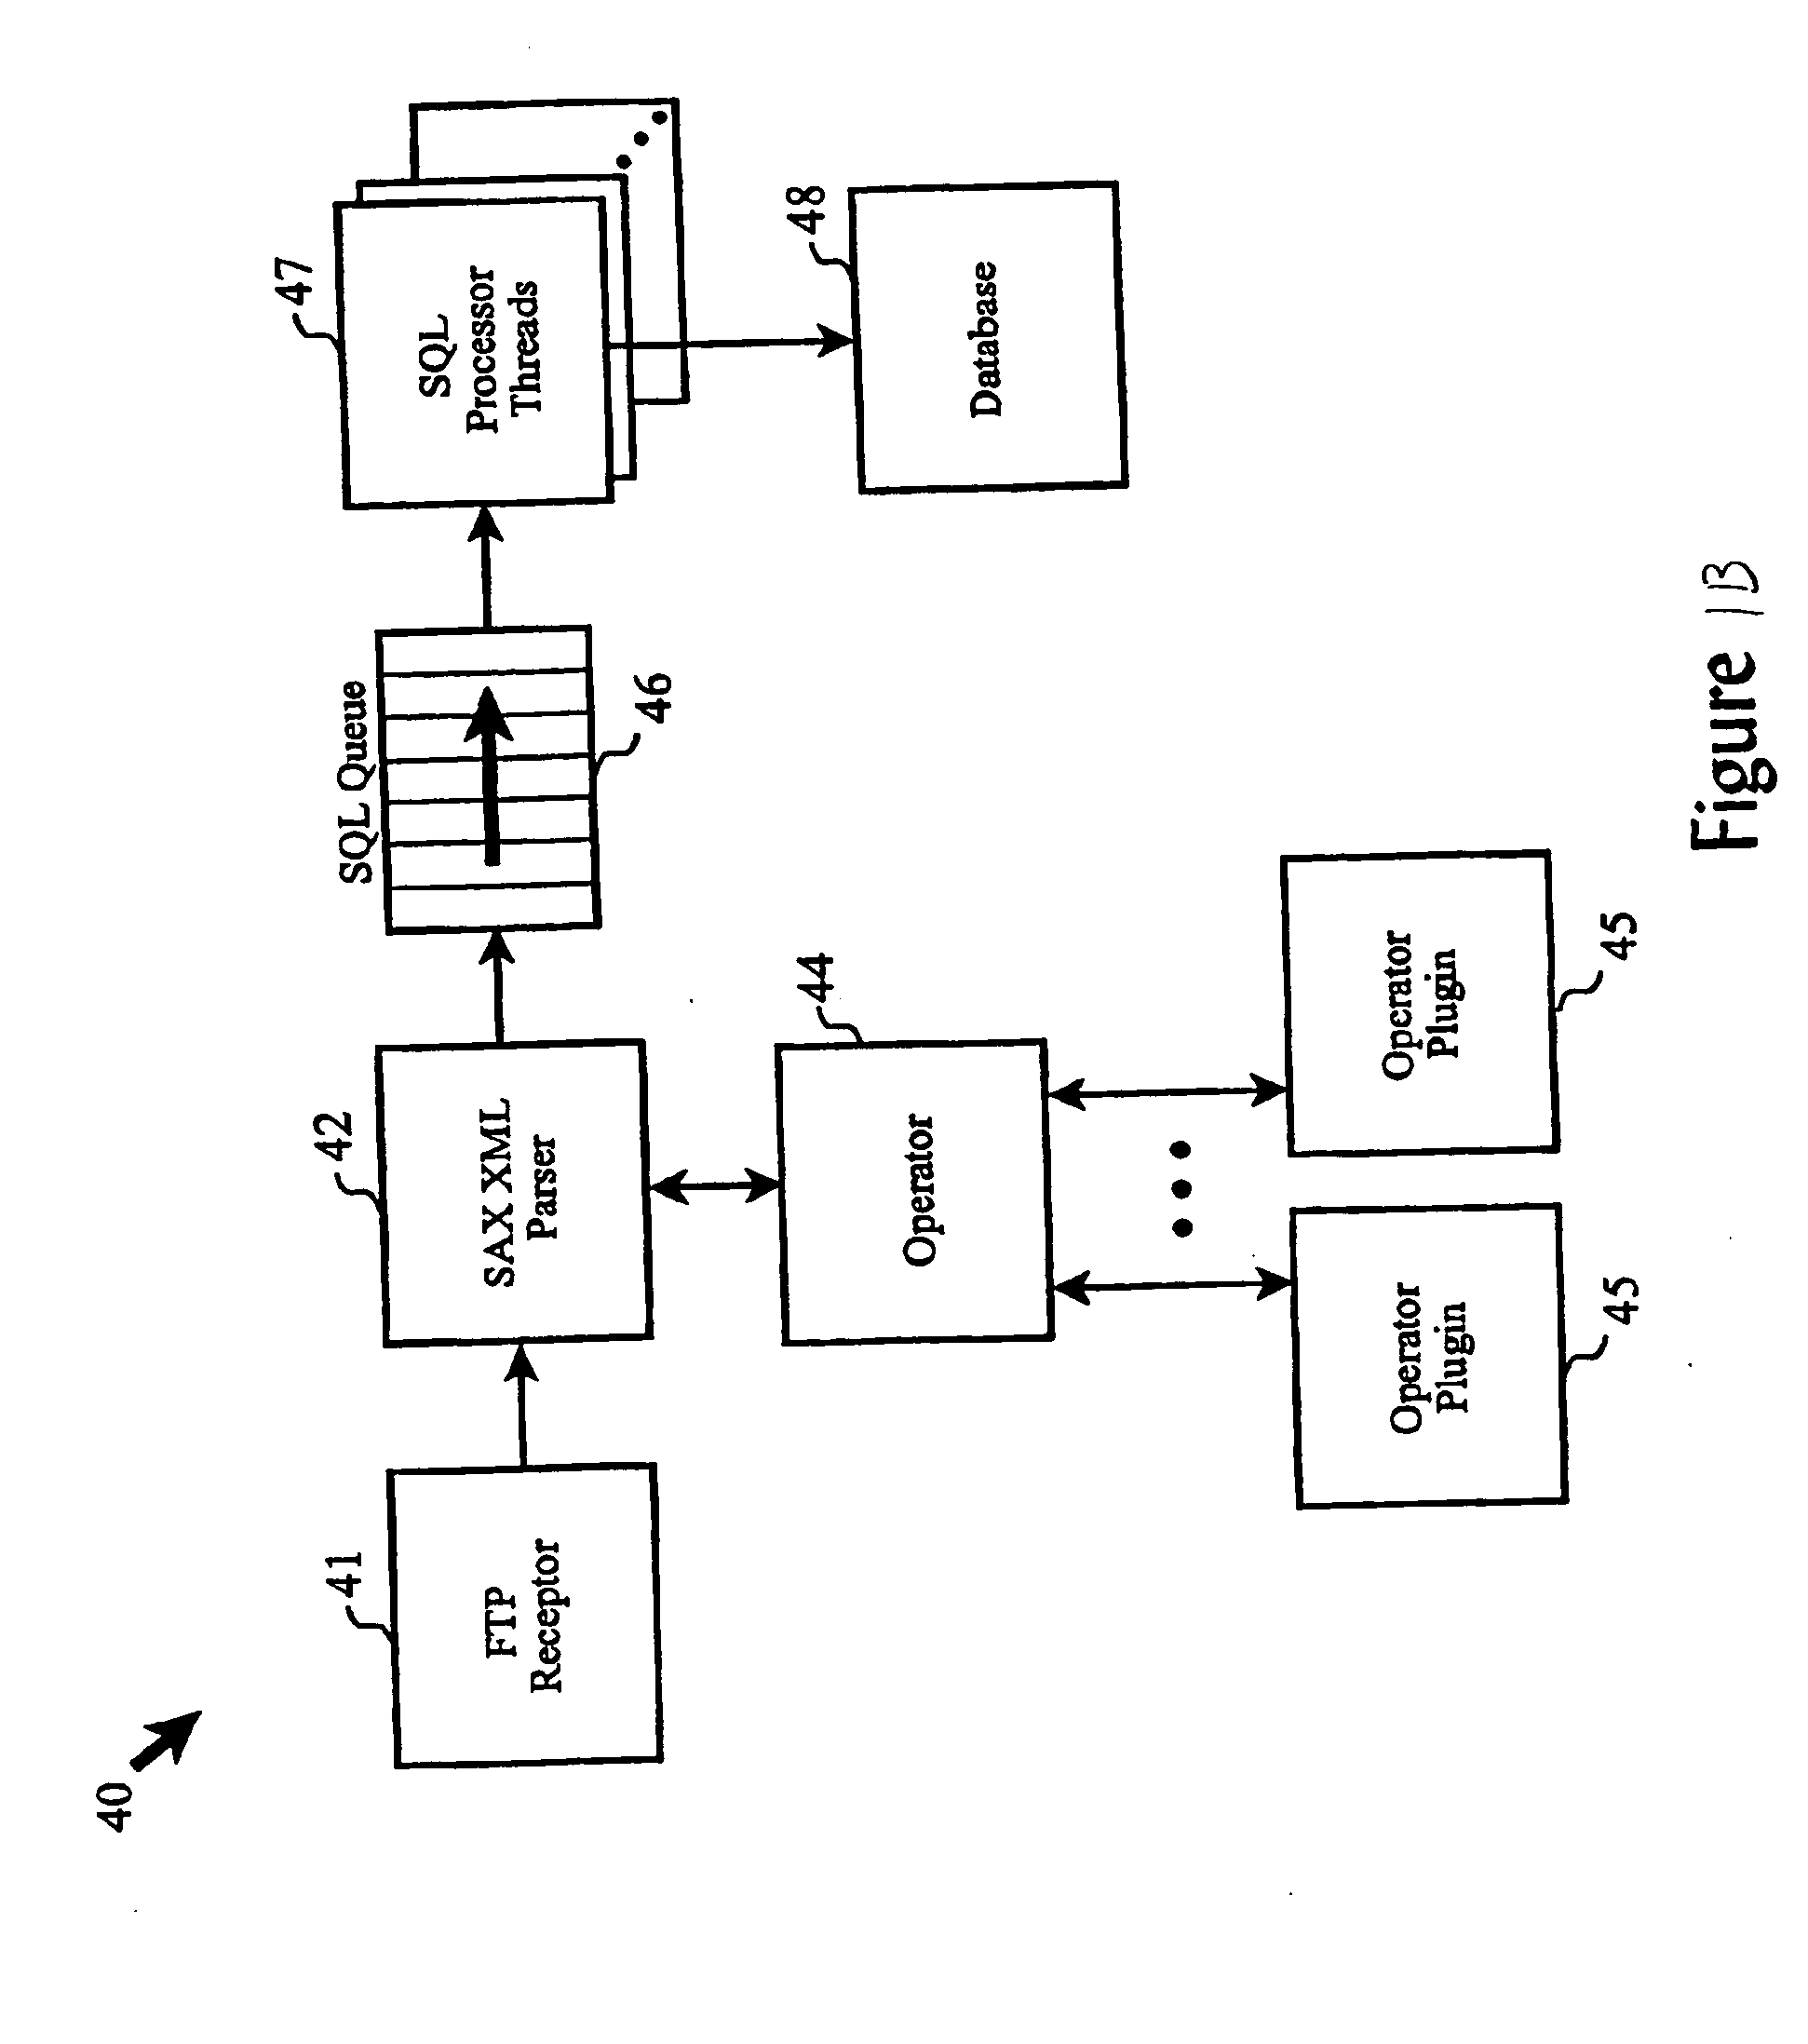 Method for scalable, fast normalization of XML documents for insertion of data into a relational database